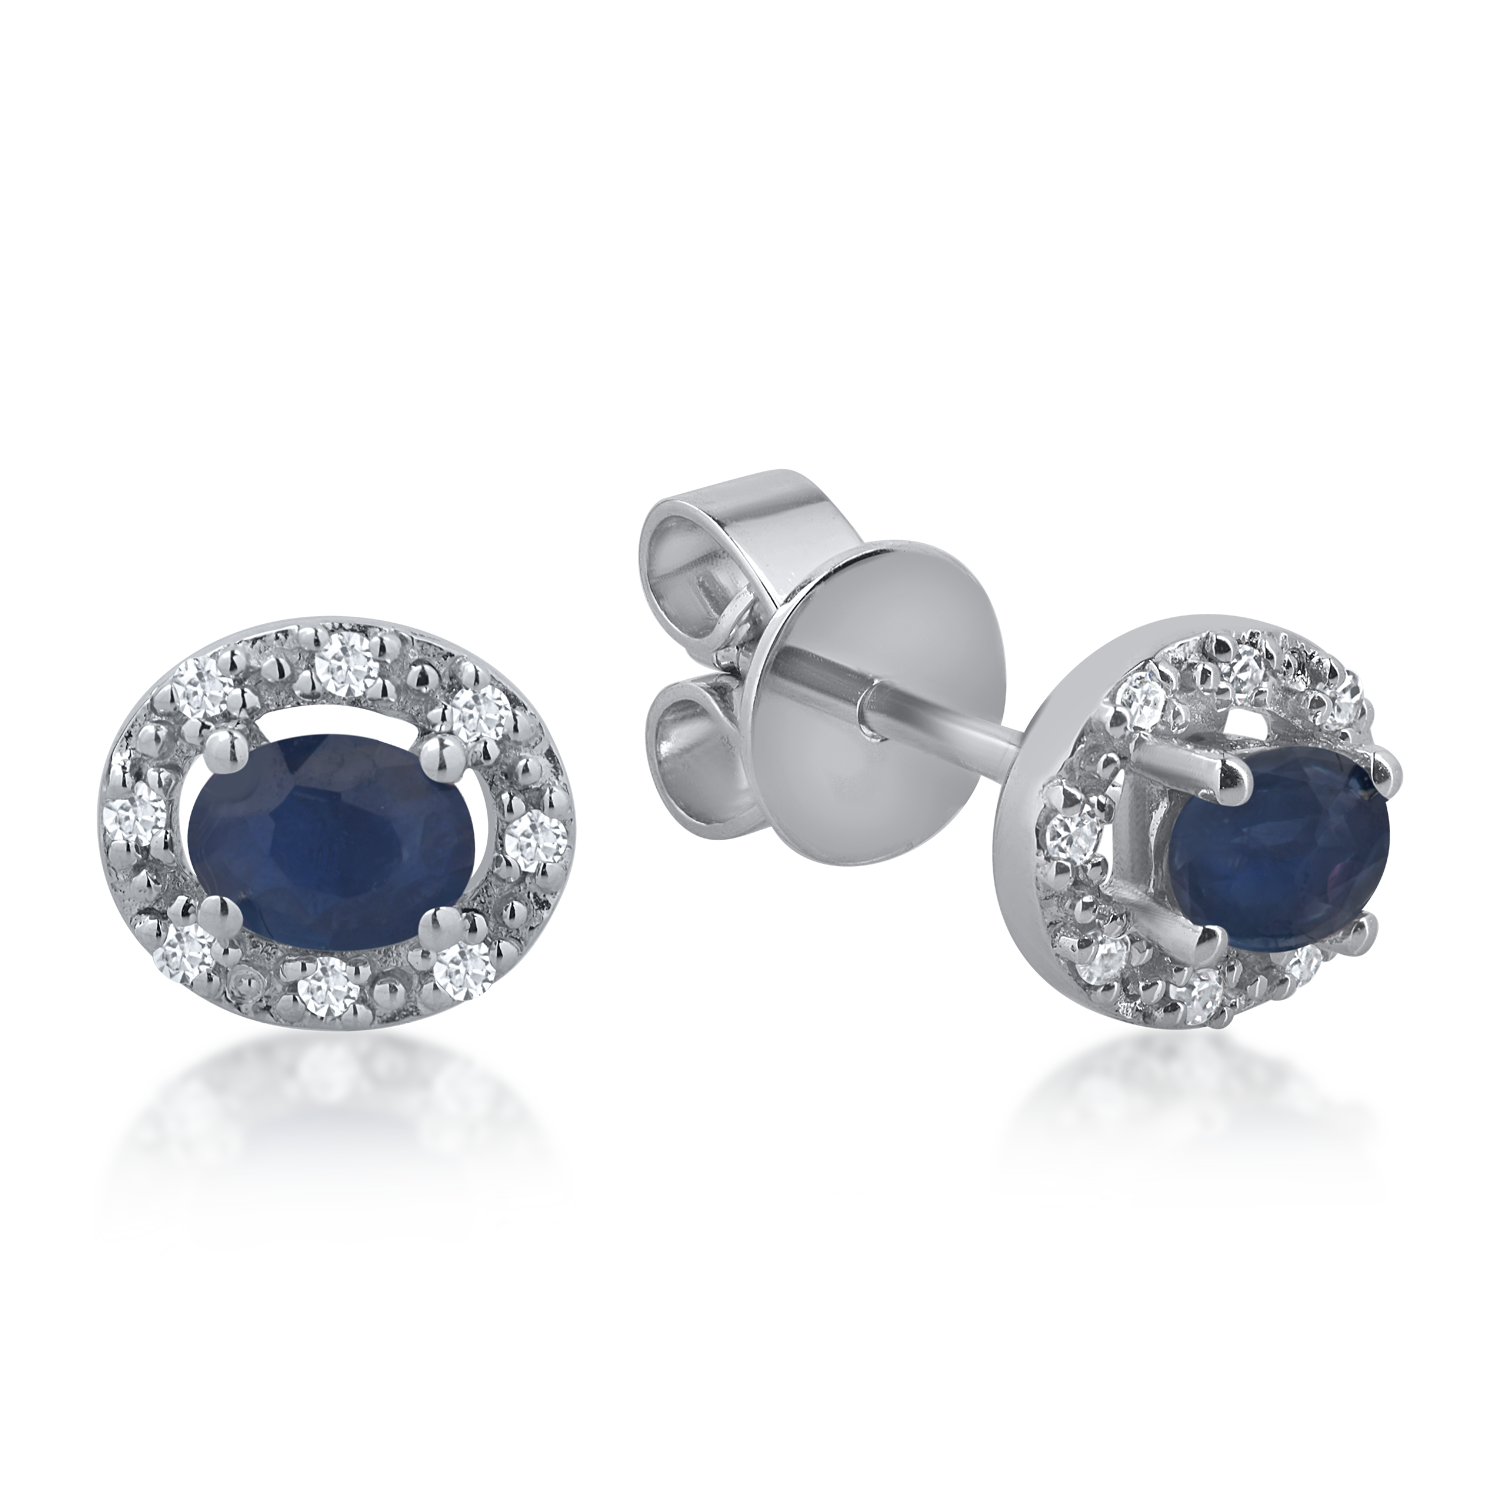 White gold earrings with 0.38ct sapphires and 0.07ct diamonds